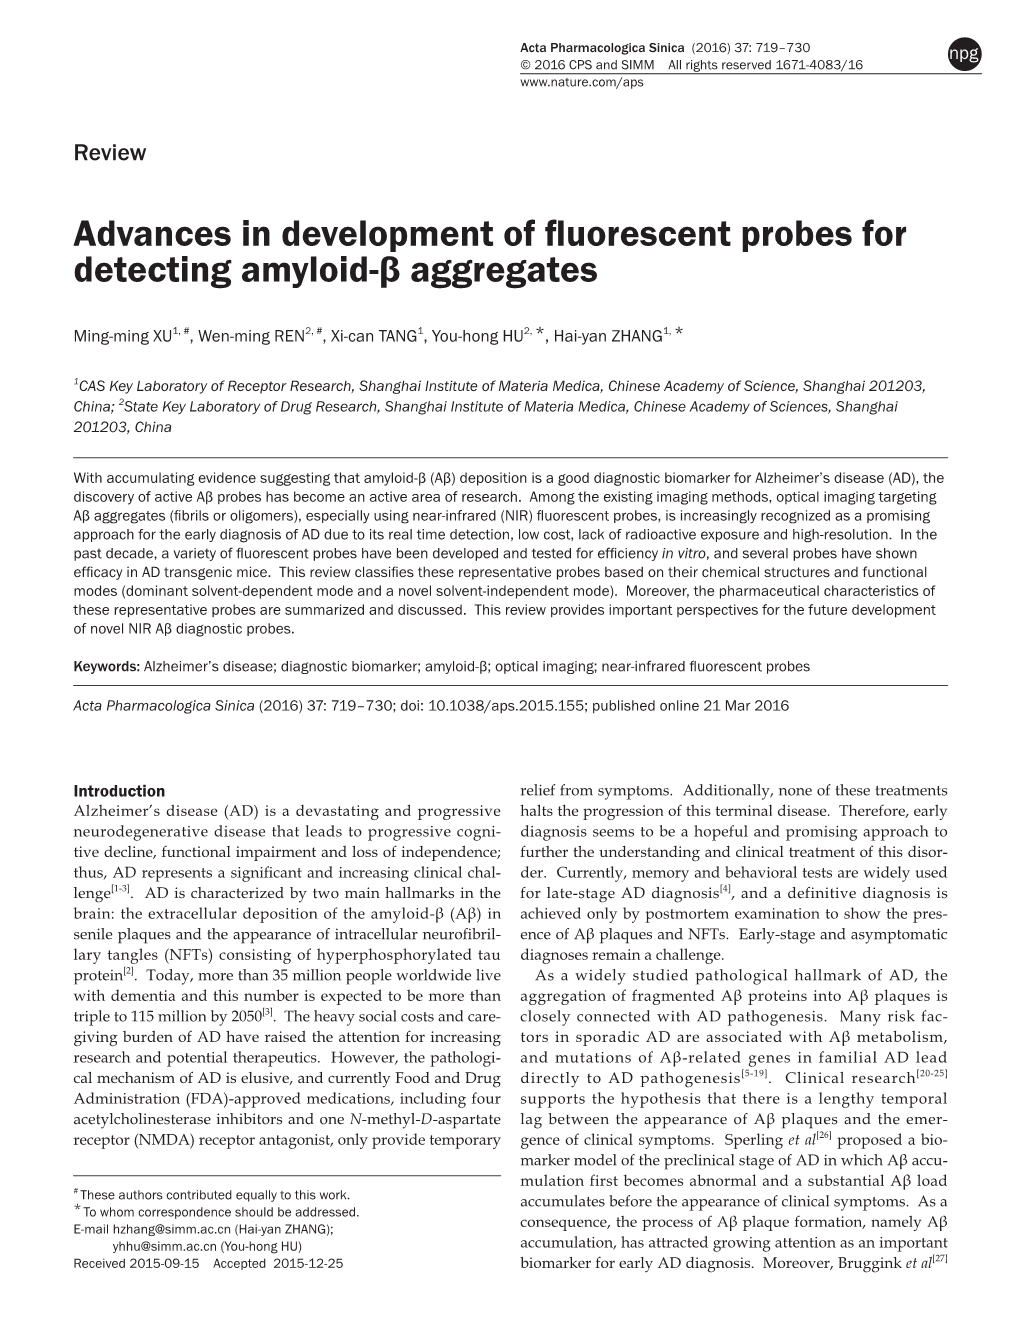 Advances in Development of Fluorescent Probes for Detecting Amyloid-Β Aggregates